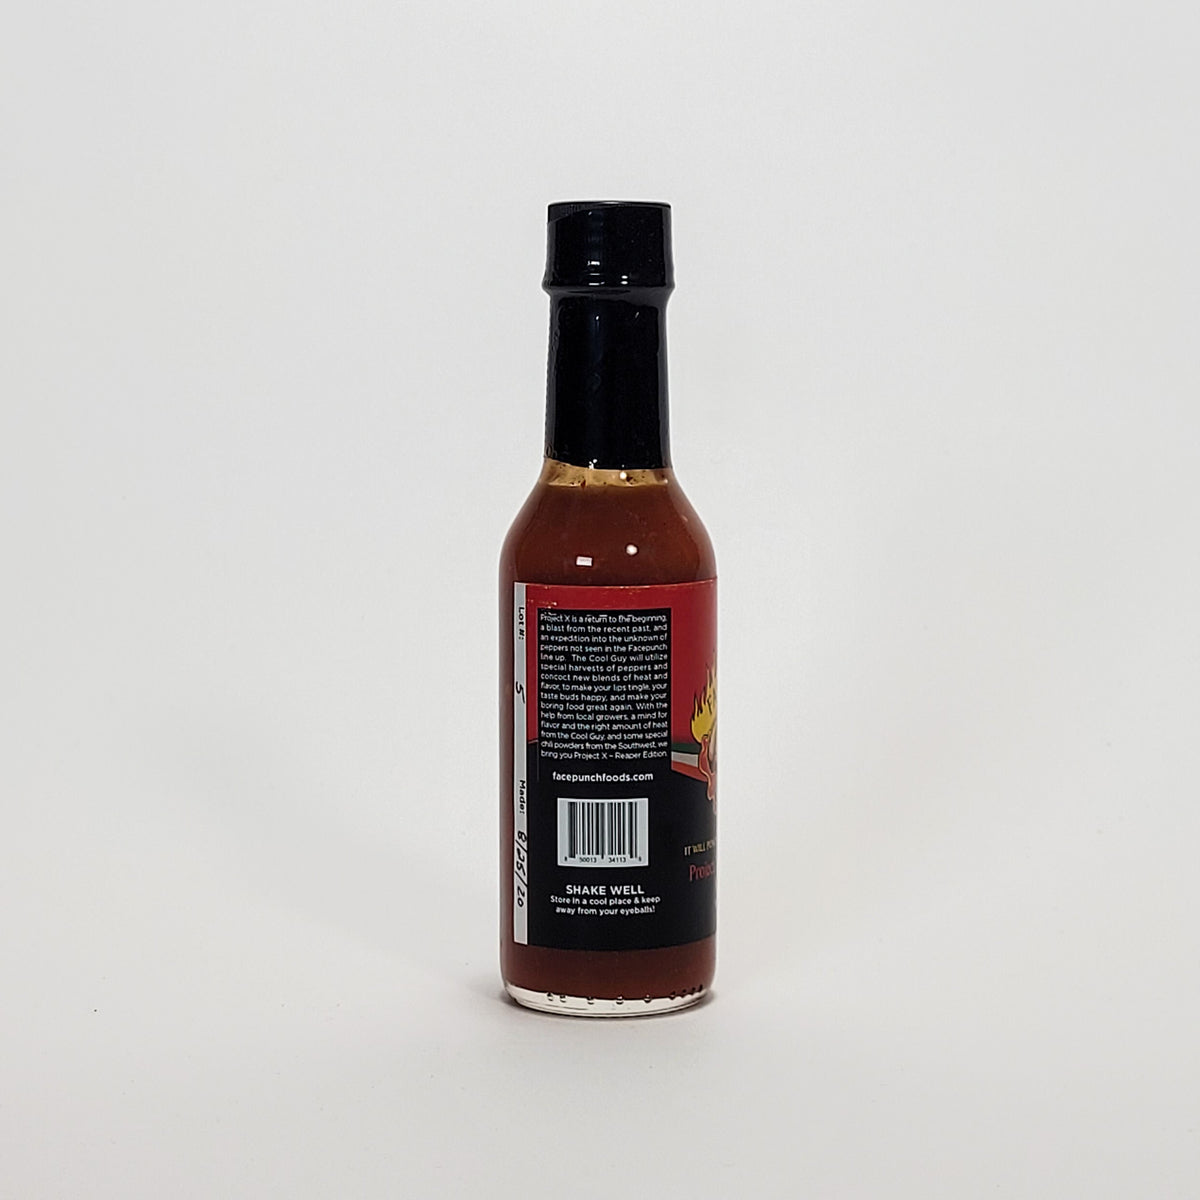 facepunch project x reaper hot sauce